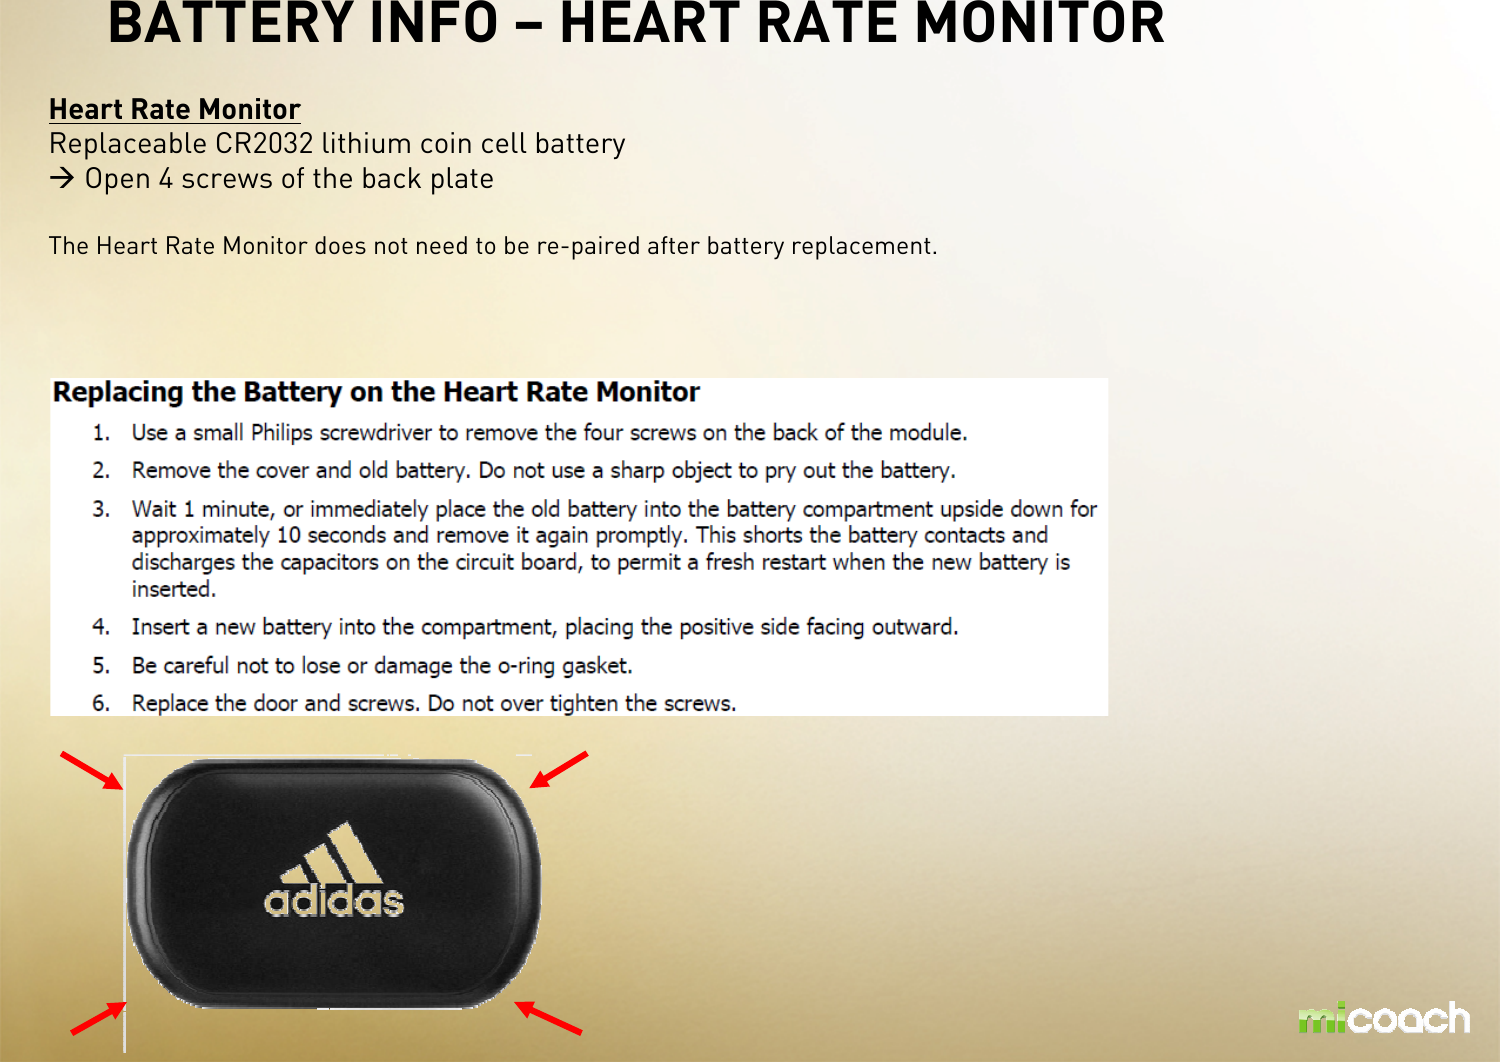 BATTERY INFO – HEART RATE MONITORHeart Rate MonitorReplaceable CR2032 lithium coin cell batteryOpen 4 screws of the back plate The Heart Rate Monitor does not need to be re-paired after battery replacement.